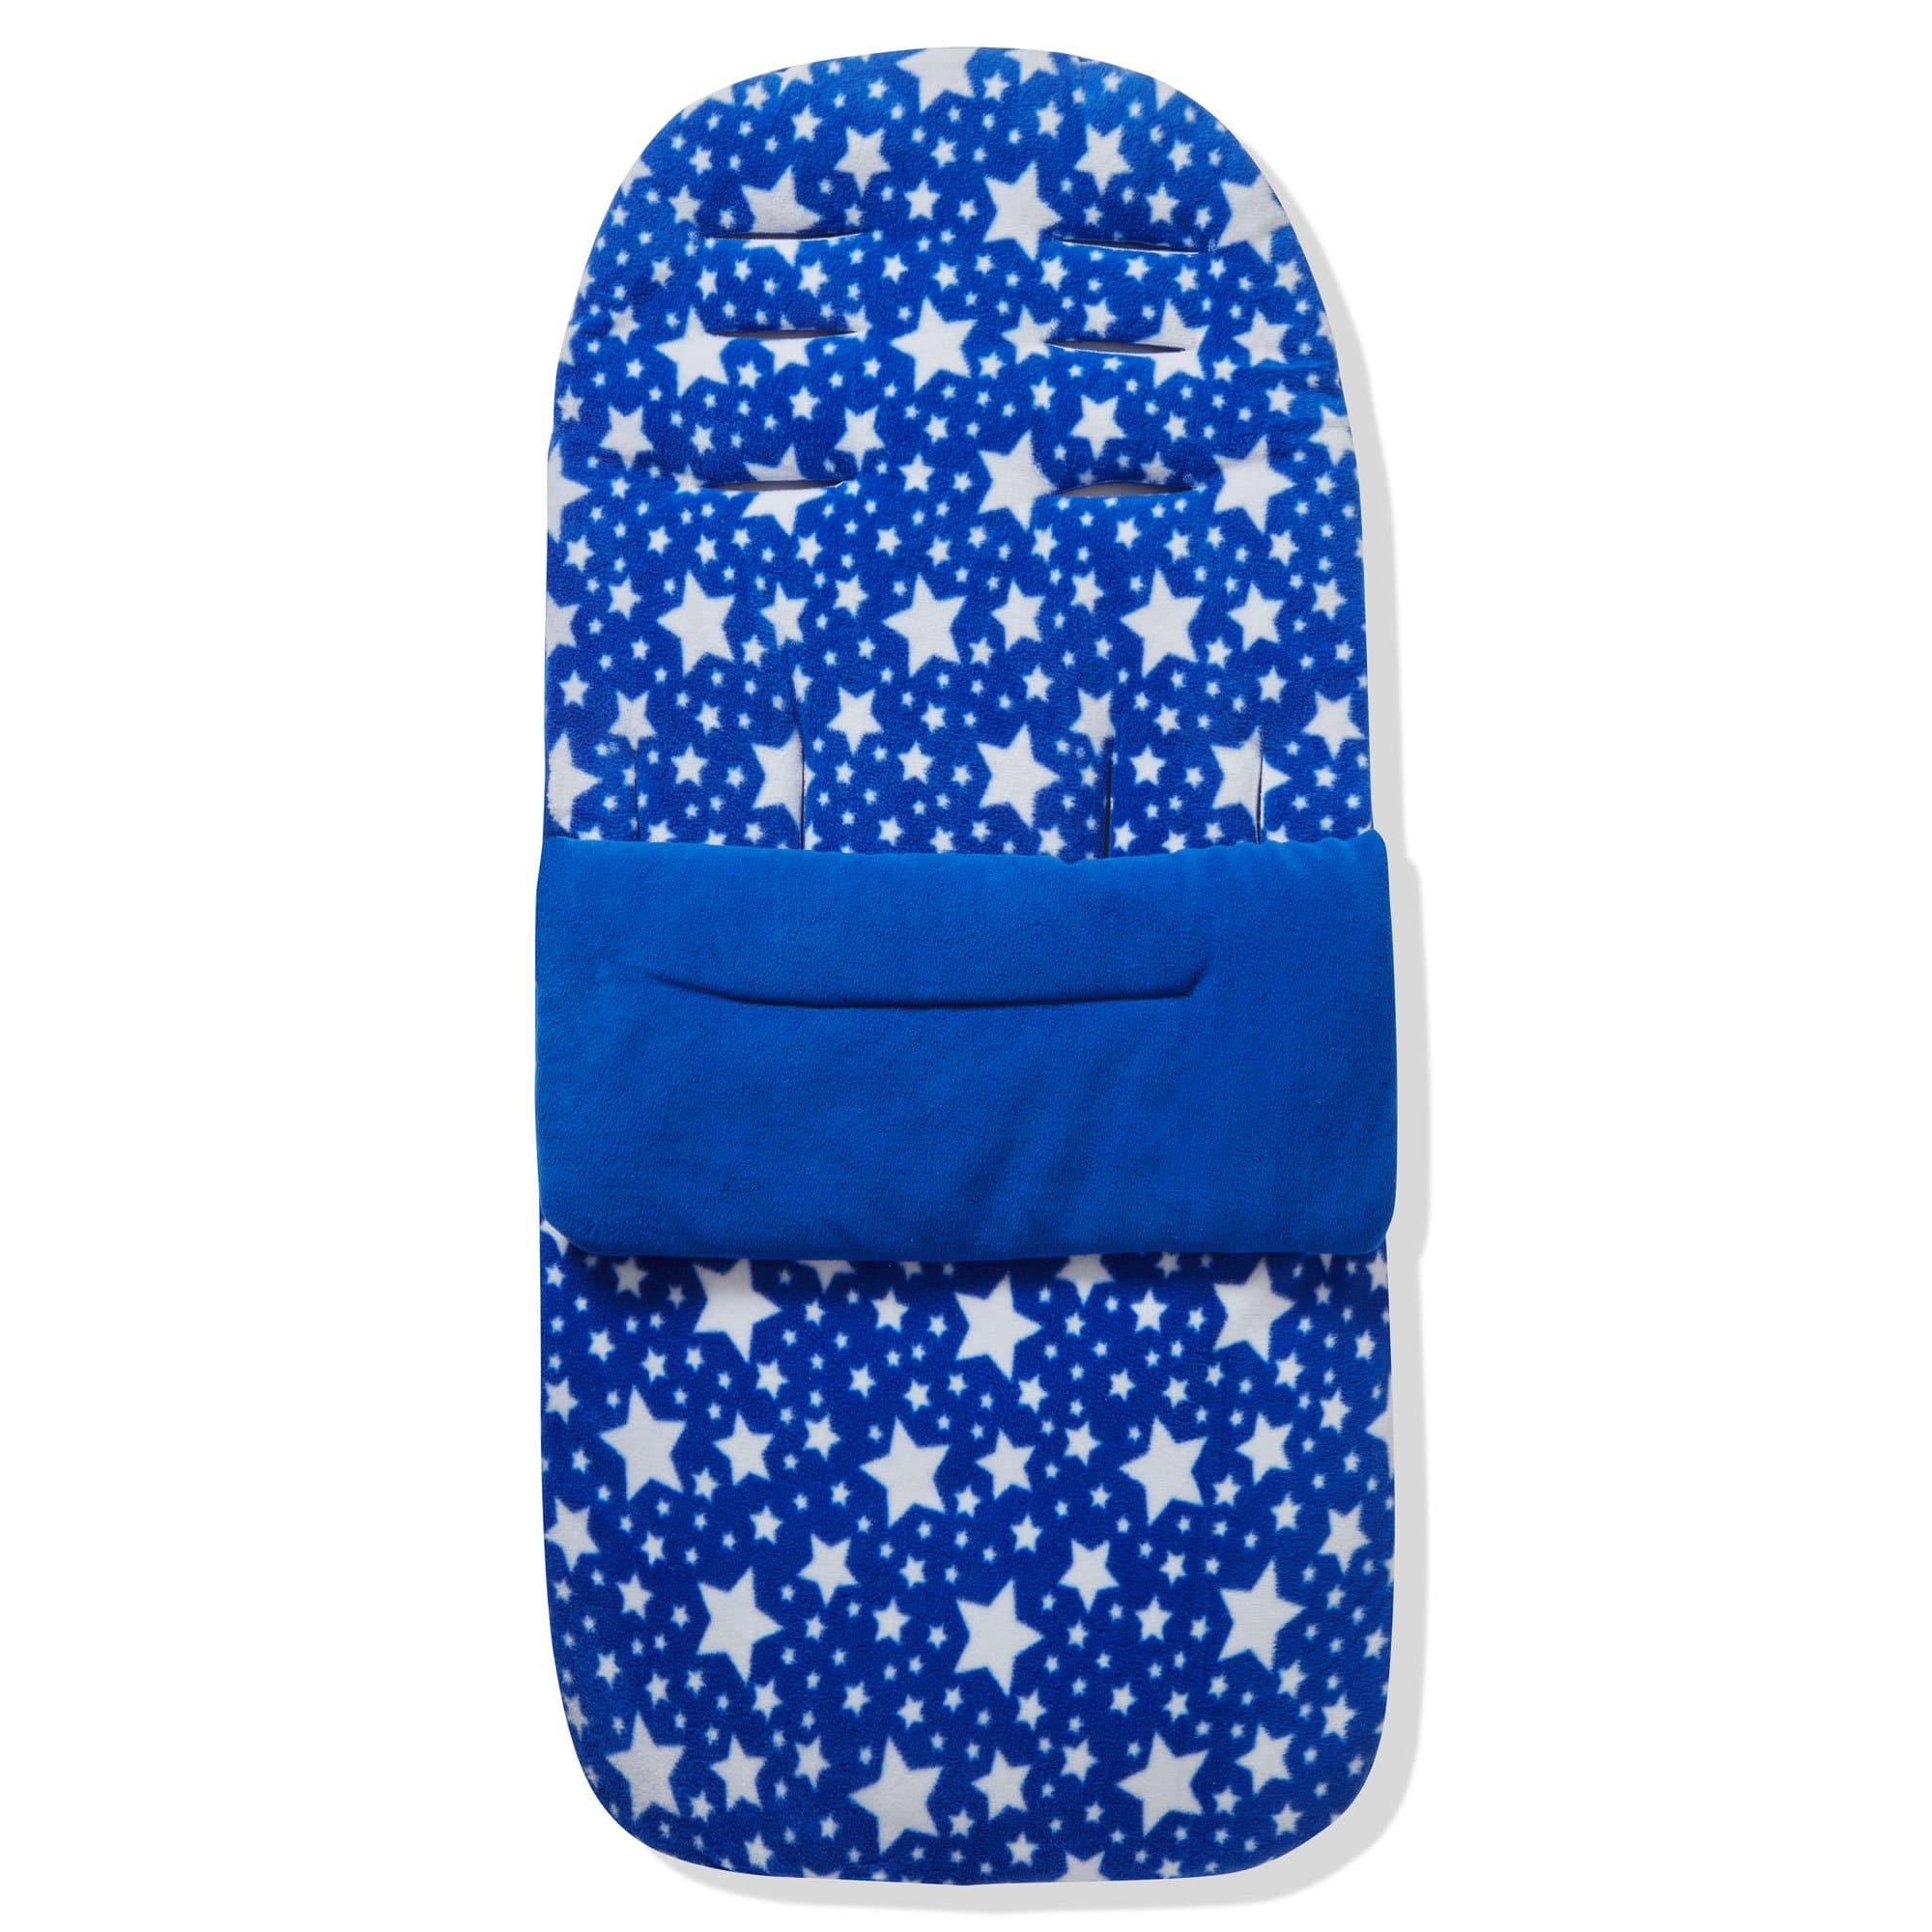 Universal Fleece Pushchair Footmuff / Cosy Toes - Fits All Pushchairs / Prams And Buggies - For Your Little One